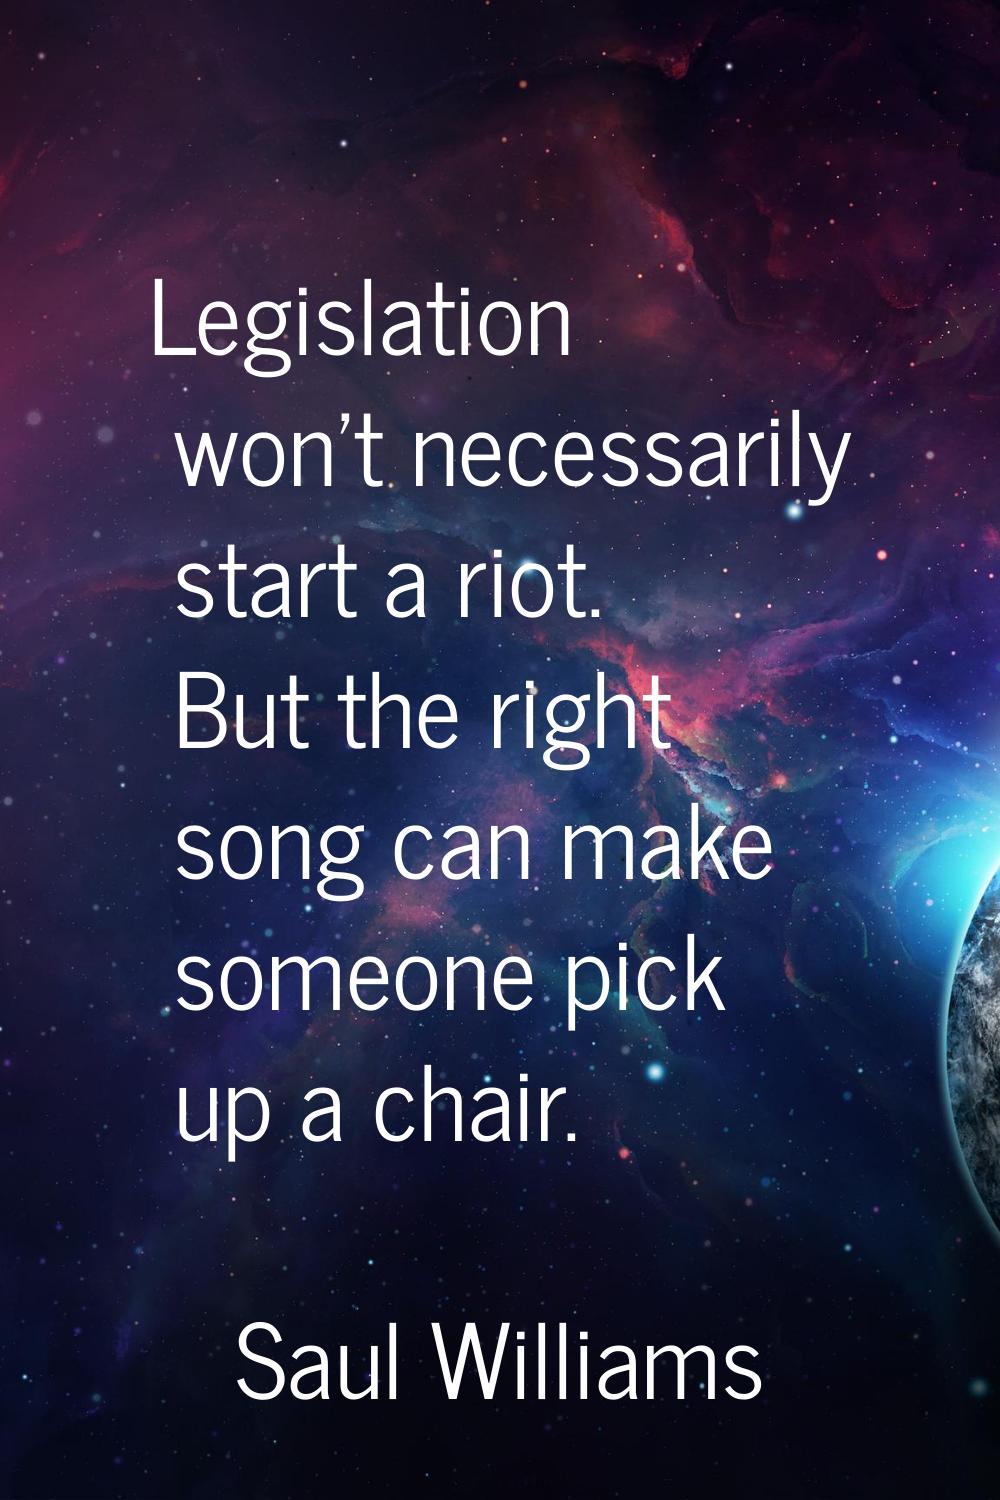 Legislation won't necessarily start a riot. But the right song can make someone pick up a chair.